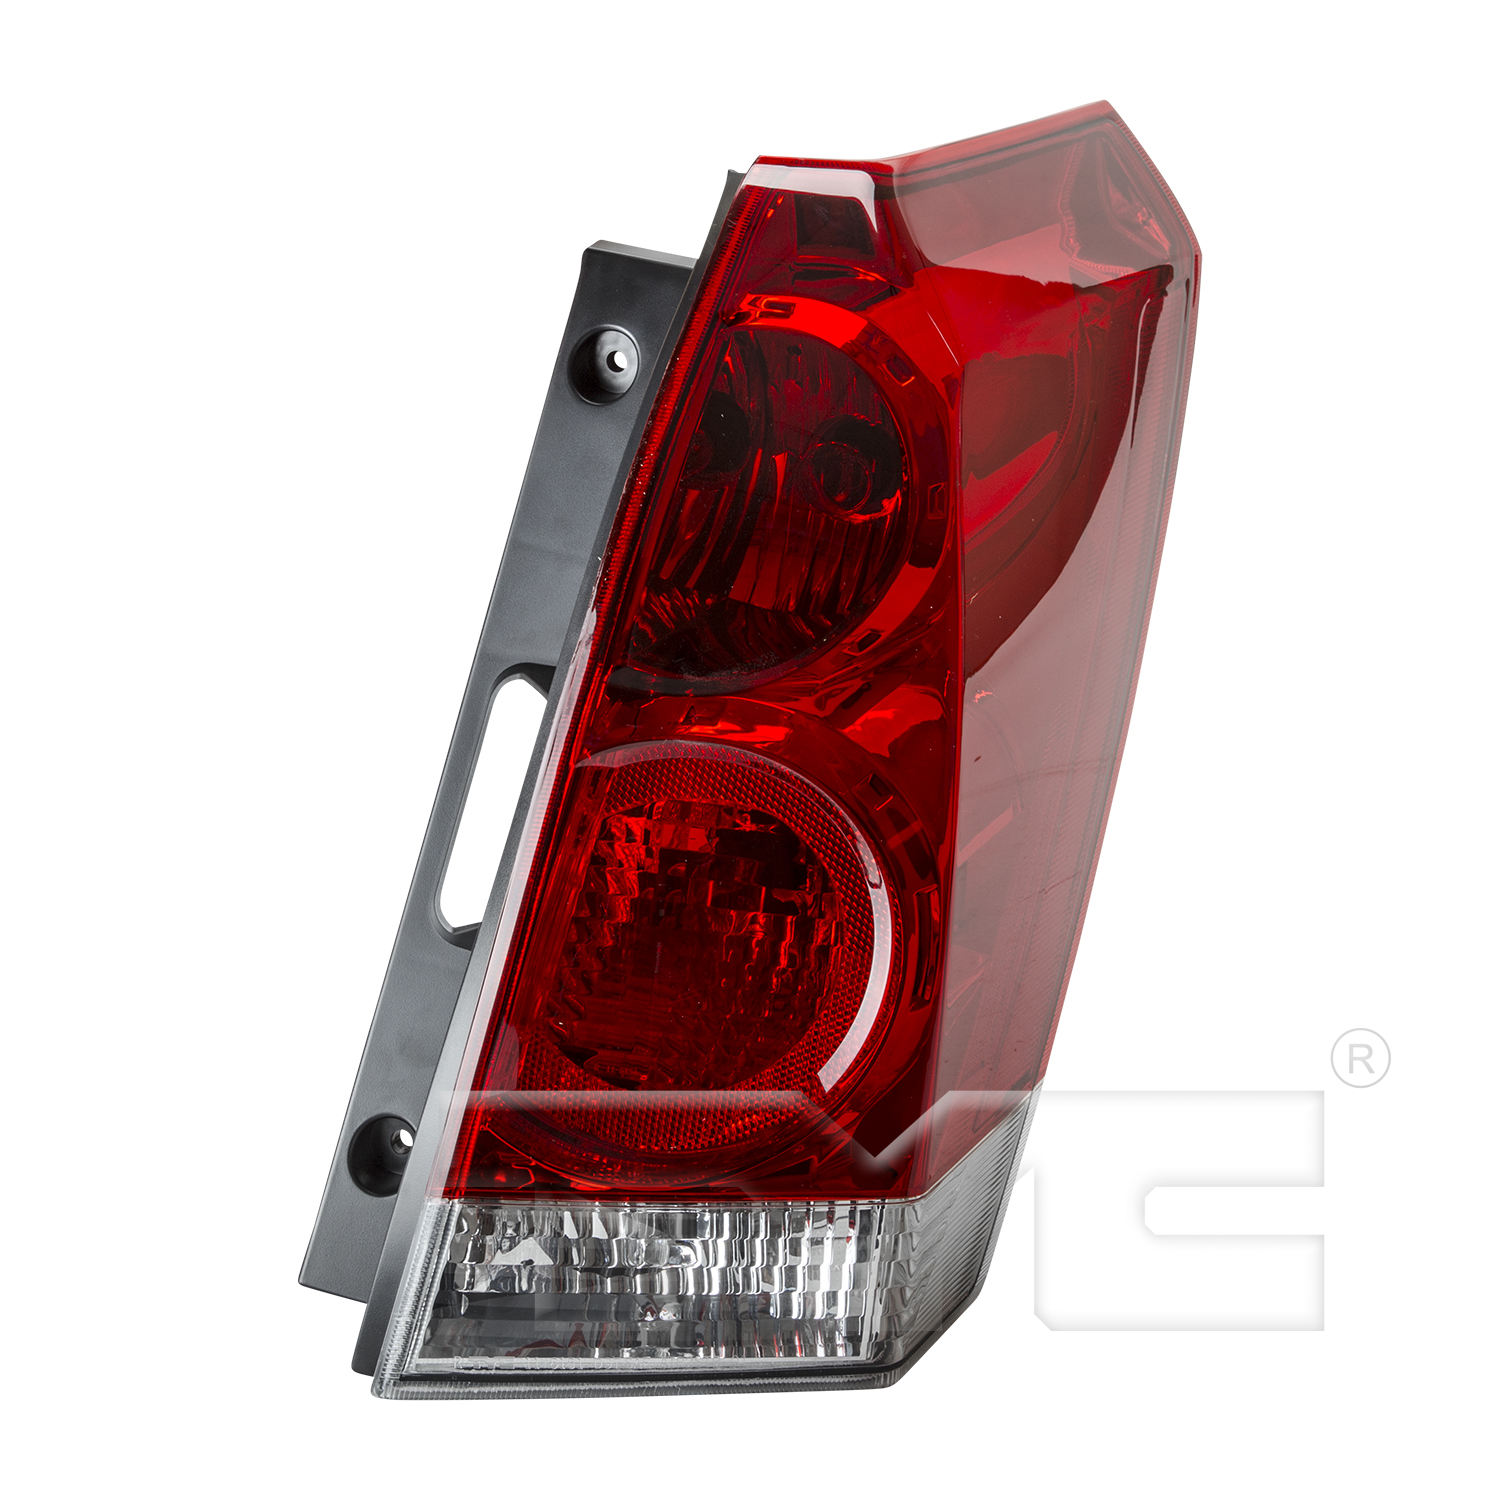 Aftermarket TAILLIGHTS for NISSAN - QUEST VAN, QUEST,04-9,RIGHT HANDSIDE TAILLIGHT NSF